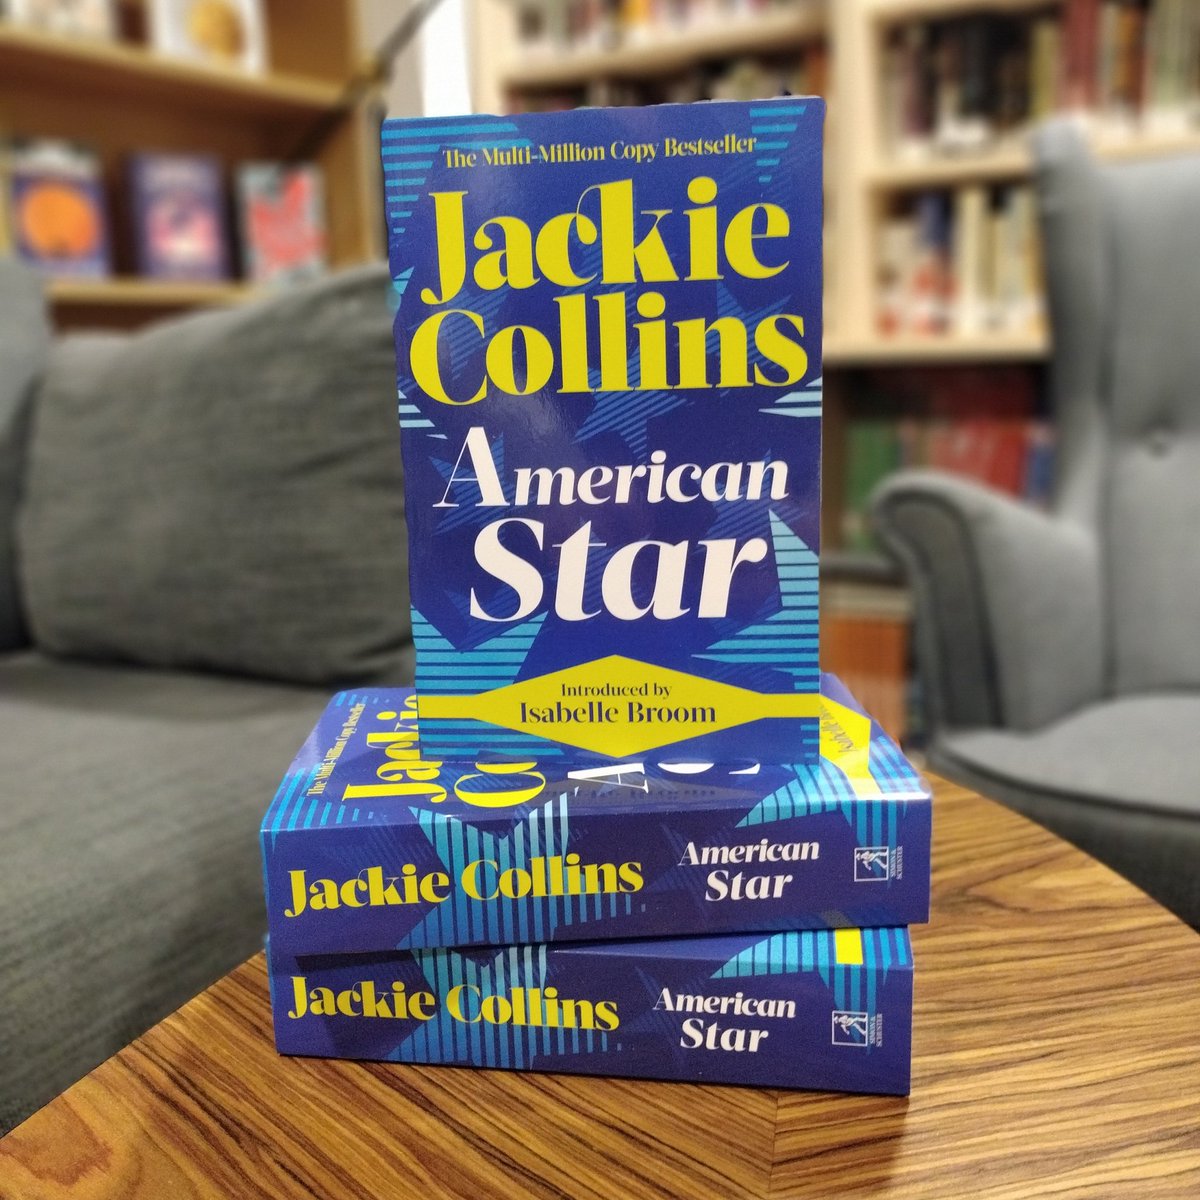 Just one month left to wait till our brand new paperback edition of the #BeMoreJackie @jackiejcollins bestseller, #AmericanStar, featuring a new intro by @Isabelle_Broom, publishes! Don't delay, pre-order today! simonandschuster.co.uk/books/American…